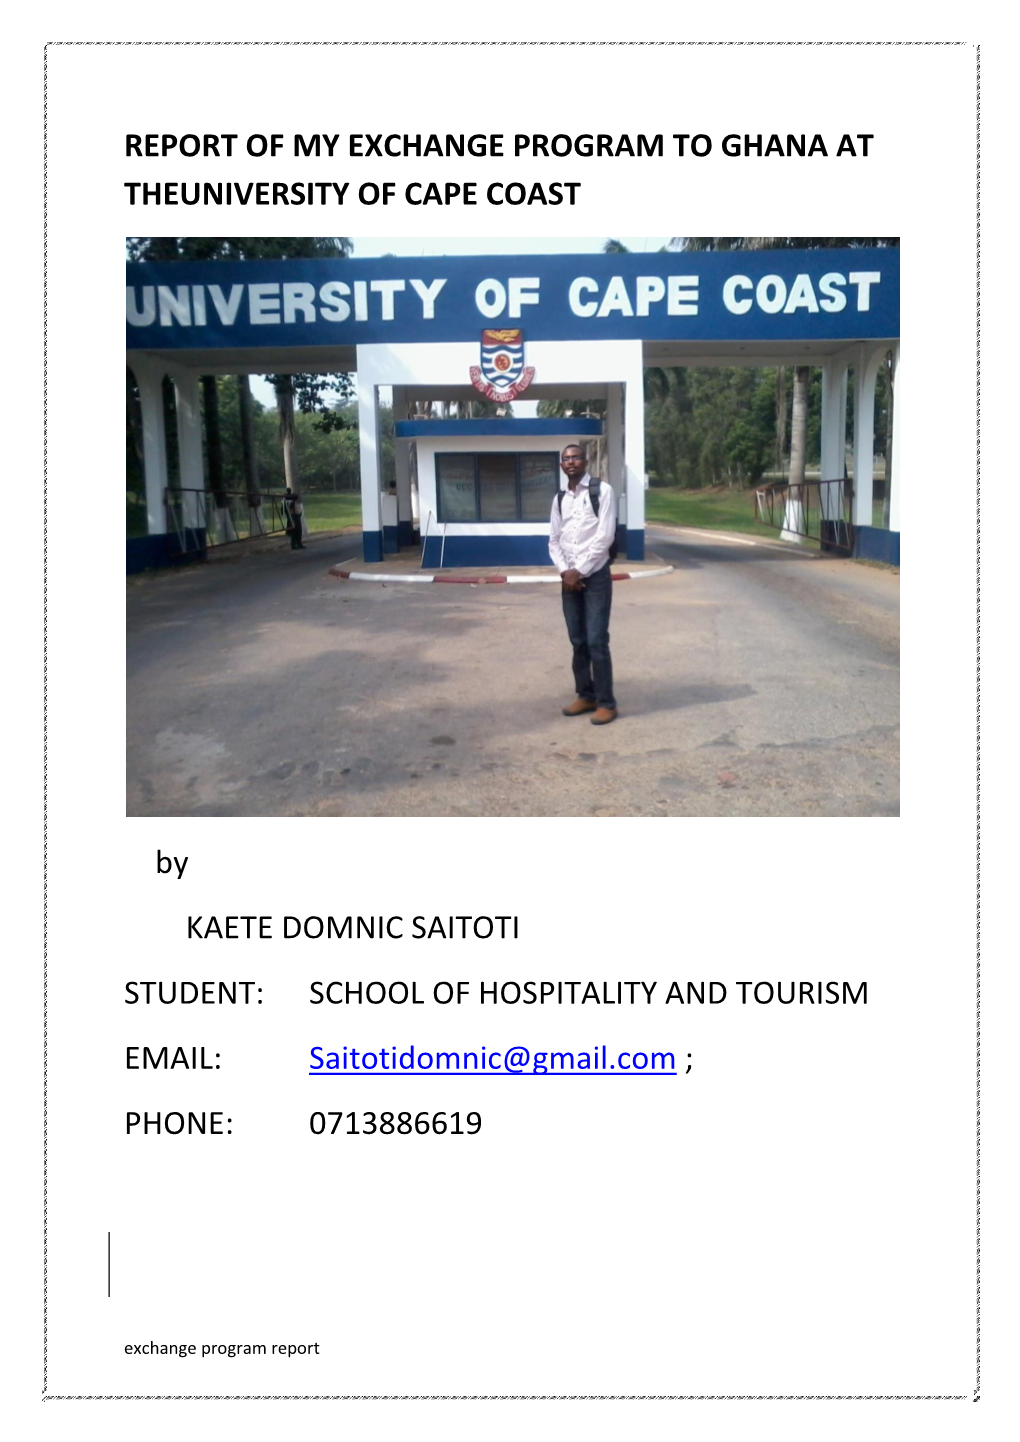 Report of My Exchange Program to Ghana at Theuniversity of Cape Coast